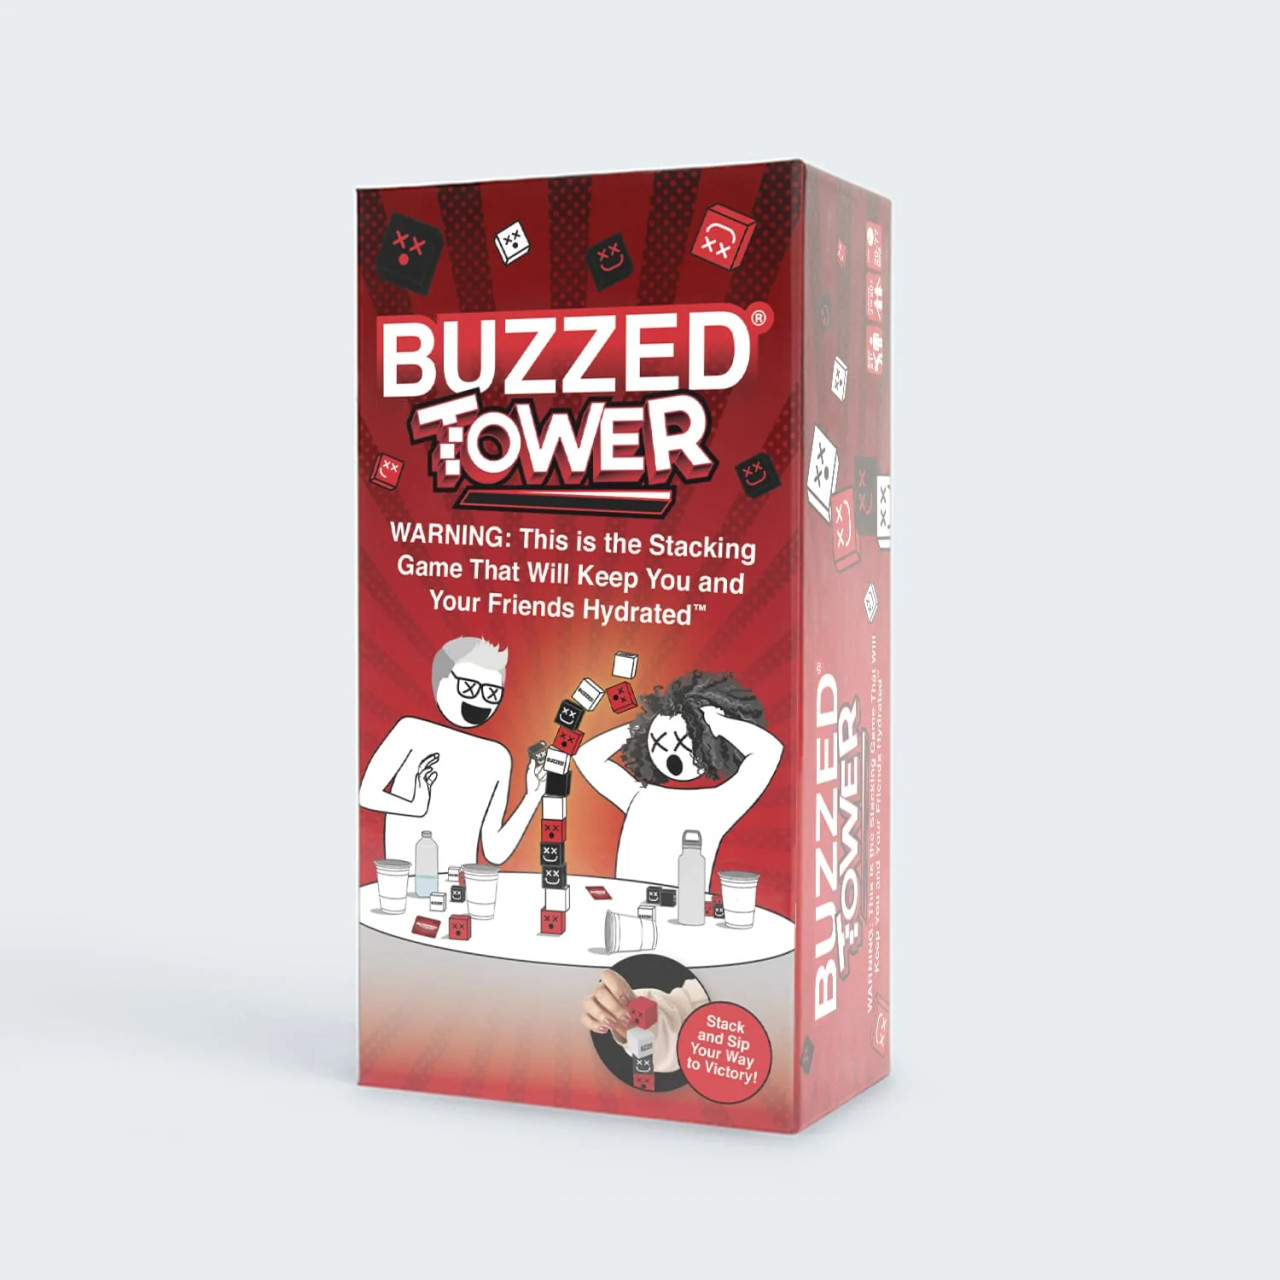 https://cdn11.bigcommerce.com/s-9im8f1/images/stencil/1280x1280/products/12452/18642/01_Buzzed_Tower-Product-Grey_01-min_1512x__83435.1668101682.jpg?c=2